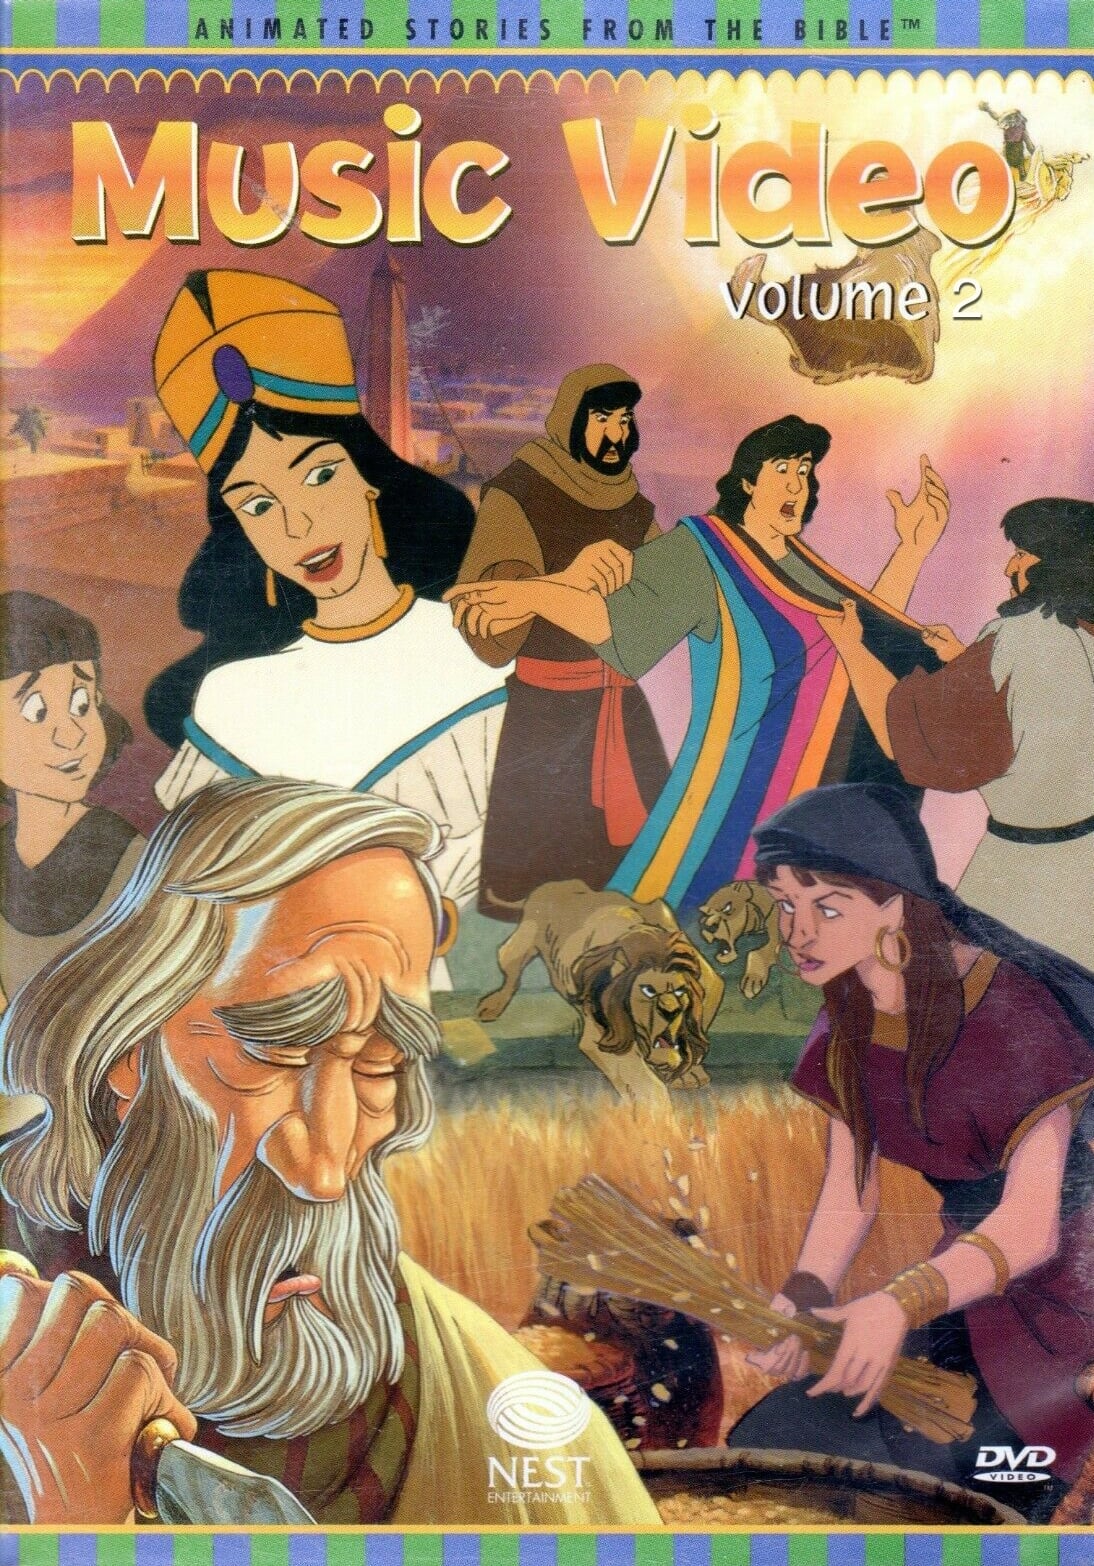 Animated Stories from the Bible Music Video - Volume 2